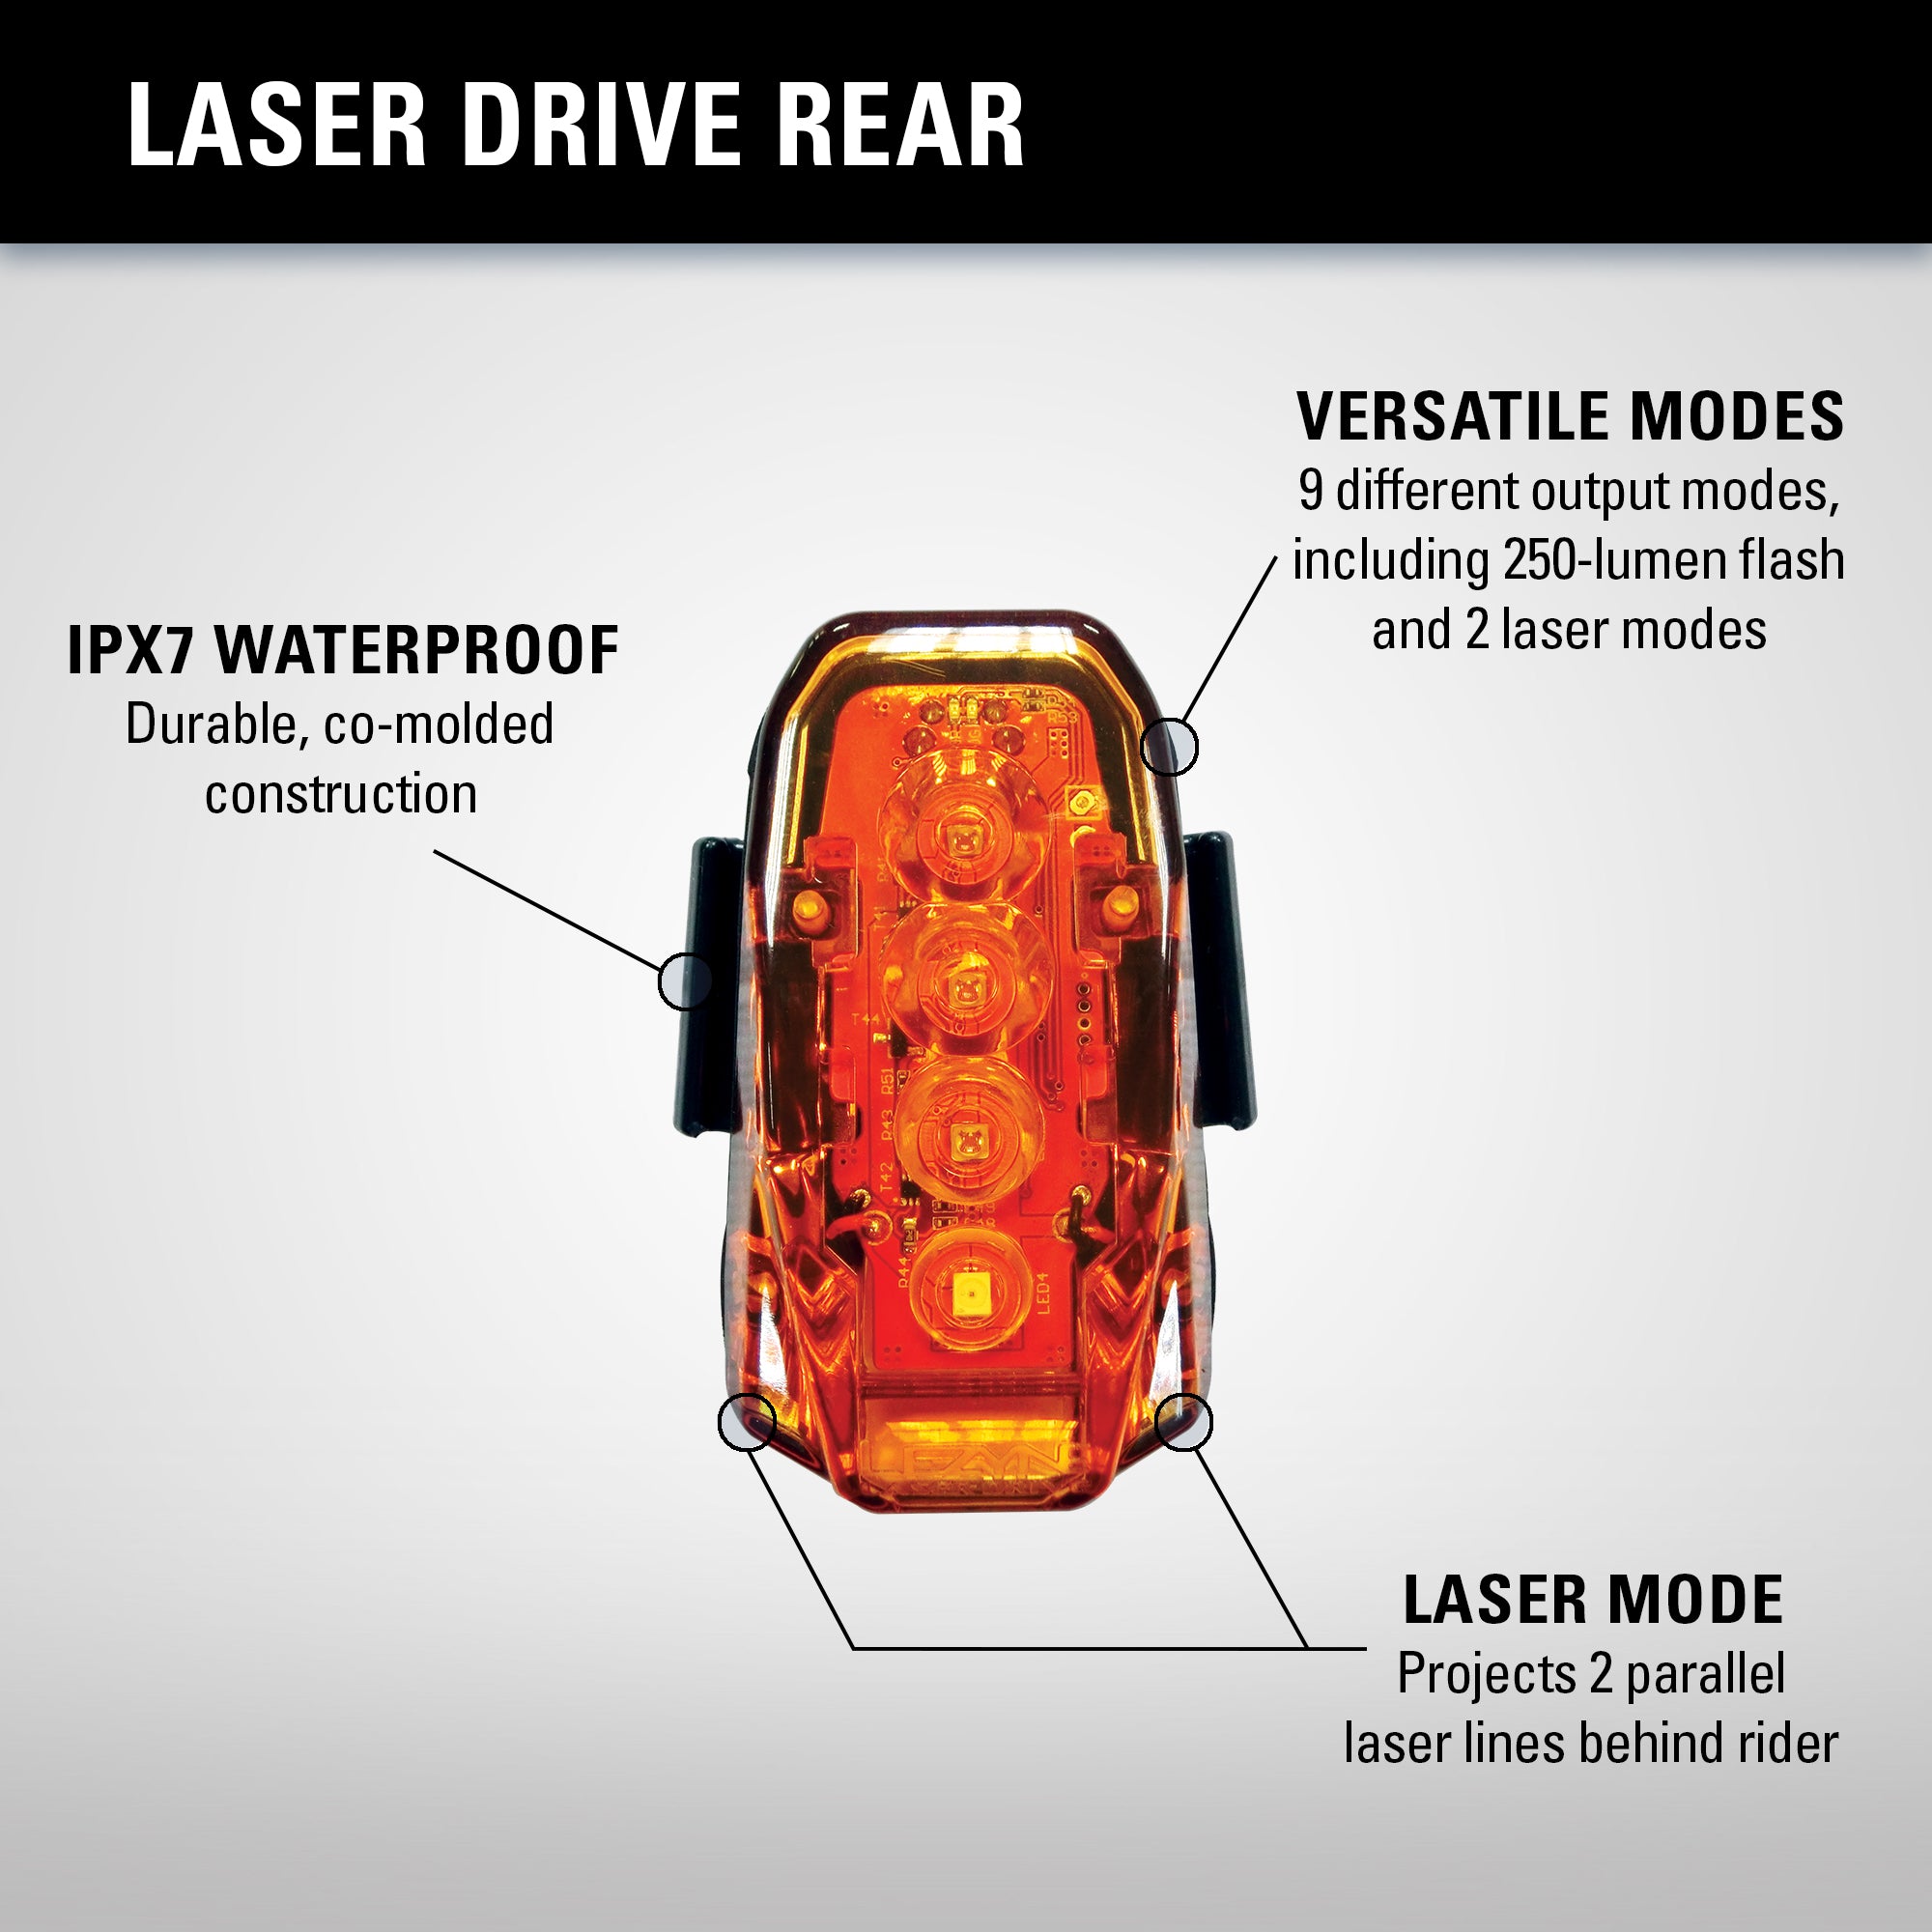 IPX7 Waterproof, Durable co-molded construction. Versatile modes, 9 different output modes, including 250 lumens flash and 2 laser modes. Laser mode, Projects 2 parallel laser lines behind rider.